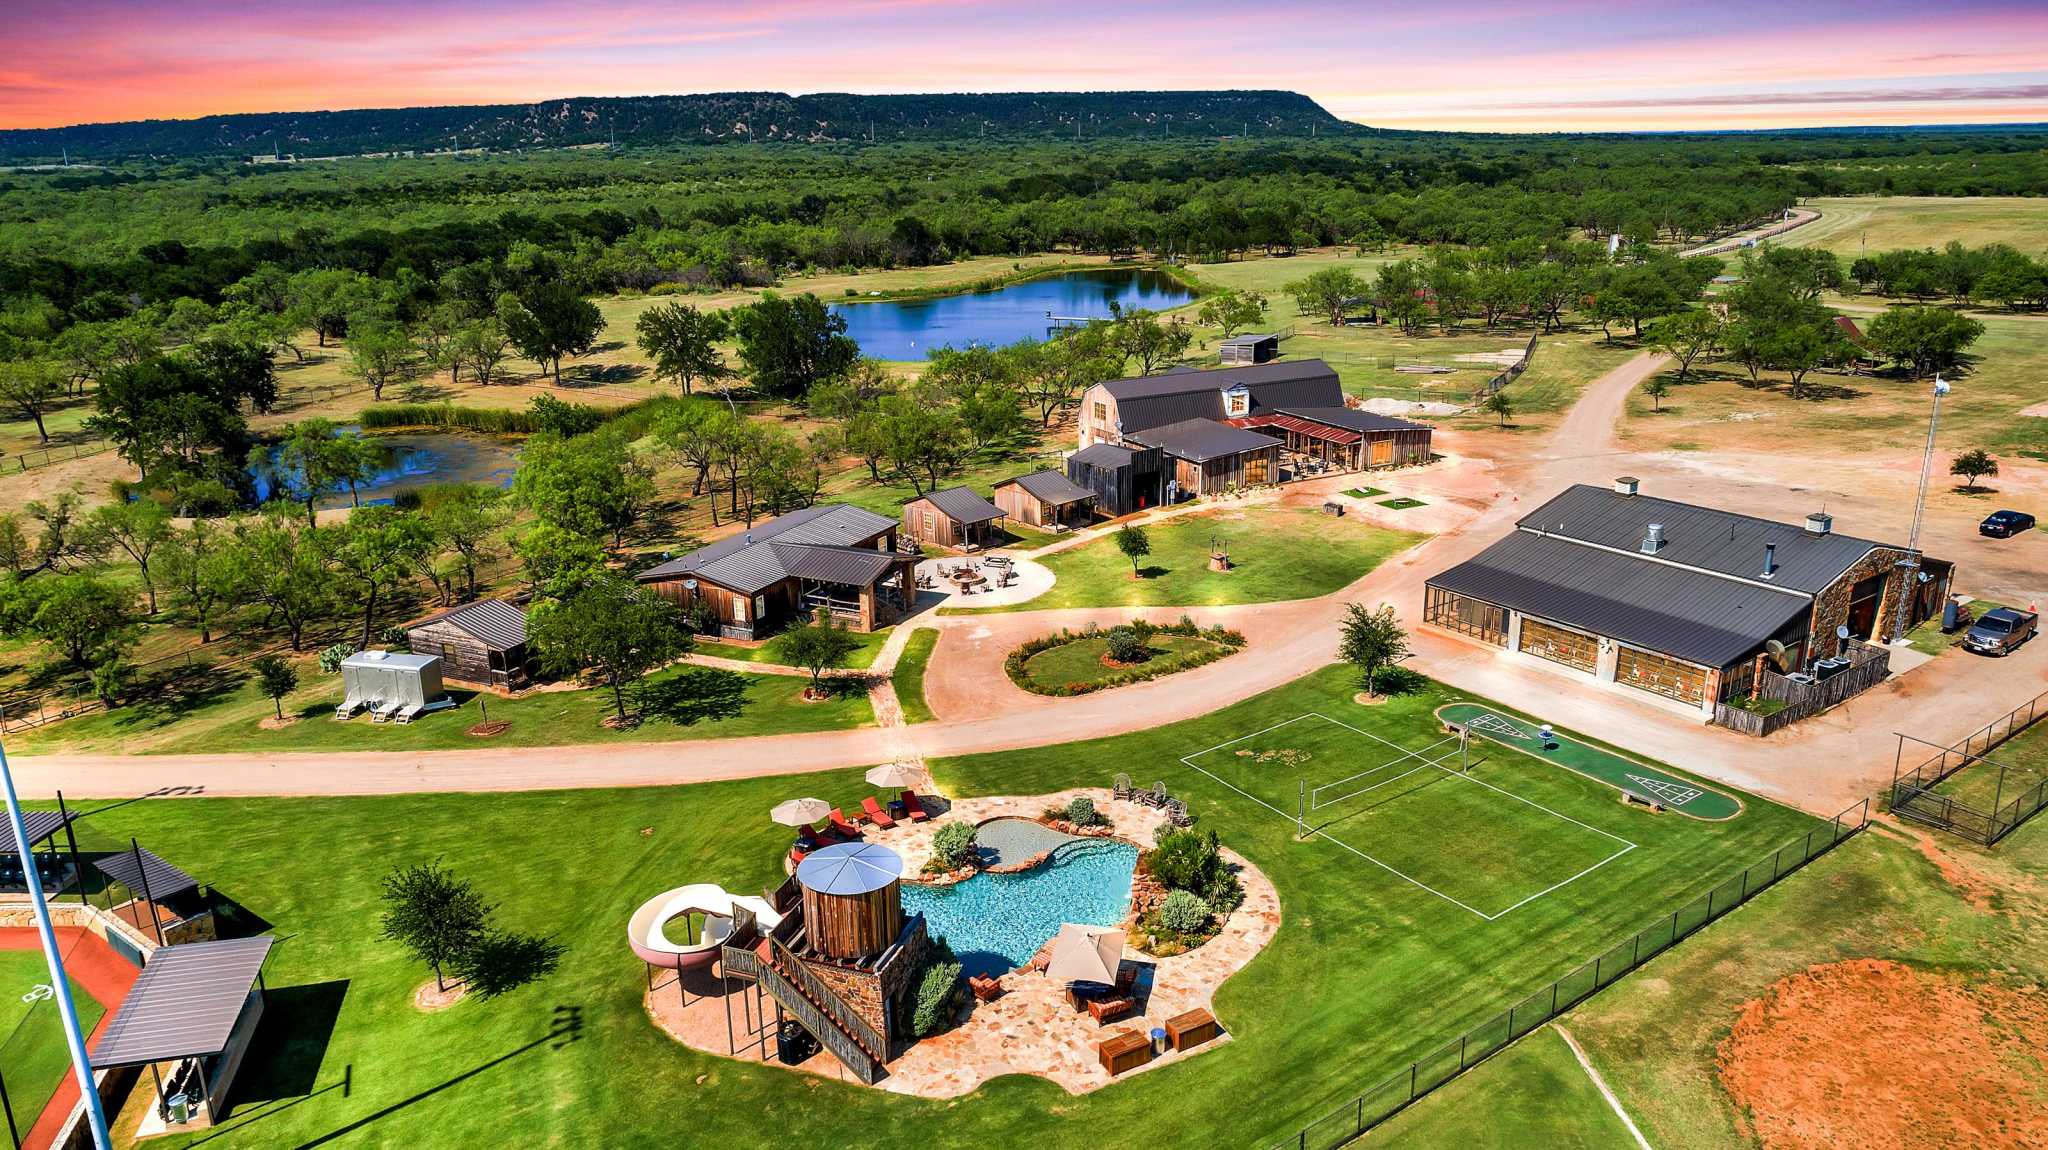 Texas Company Specializes In Luxury Resort Like Ranch Rentals With Thousands Of Unspoiled Acres